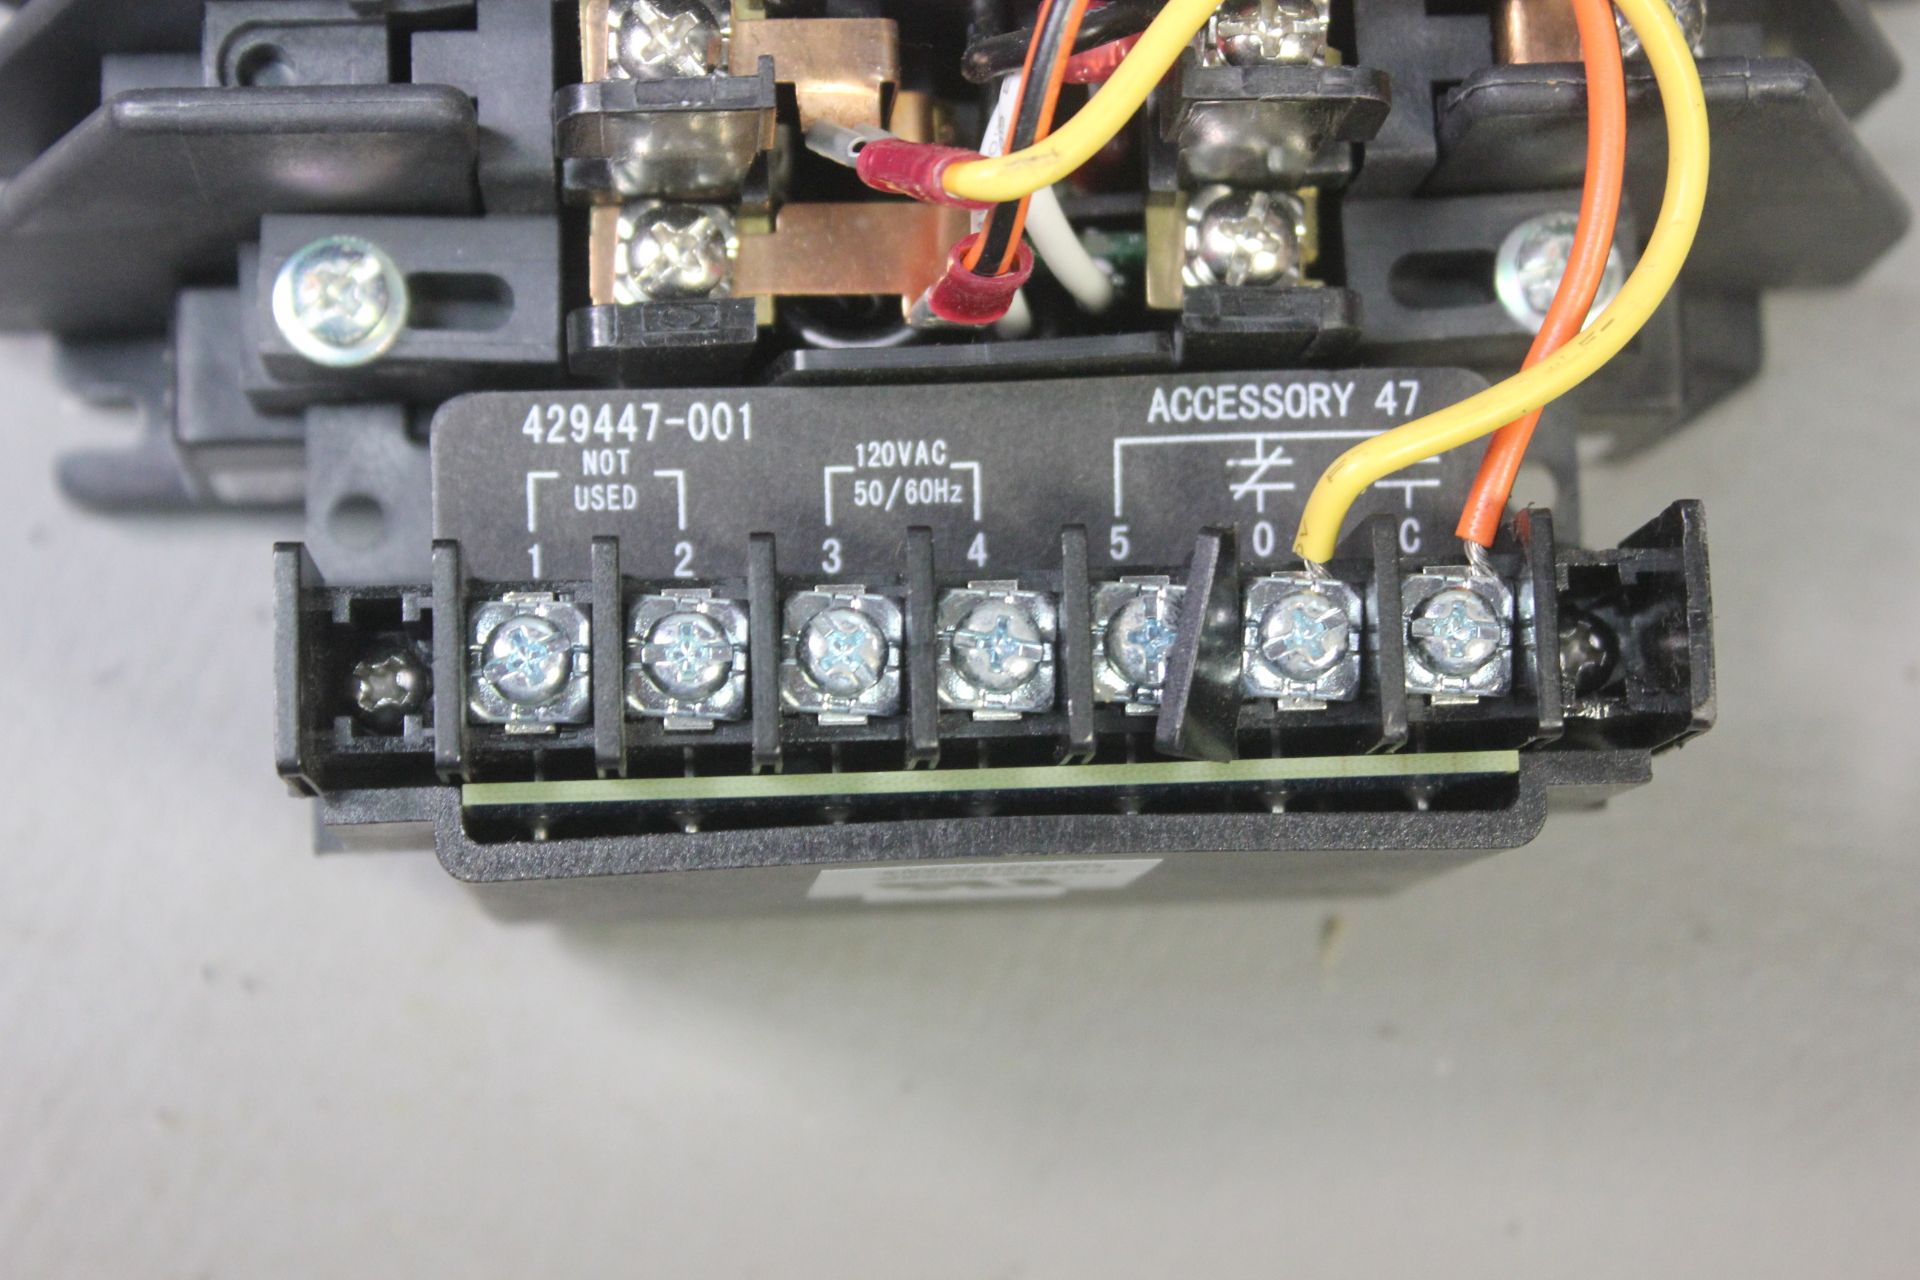 UNUSED SIEMENS CLM LIGHTING CONTACTOR WITH CONTROL MODULE - Image 4 of 4